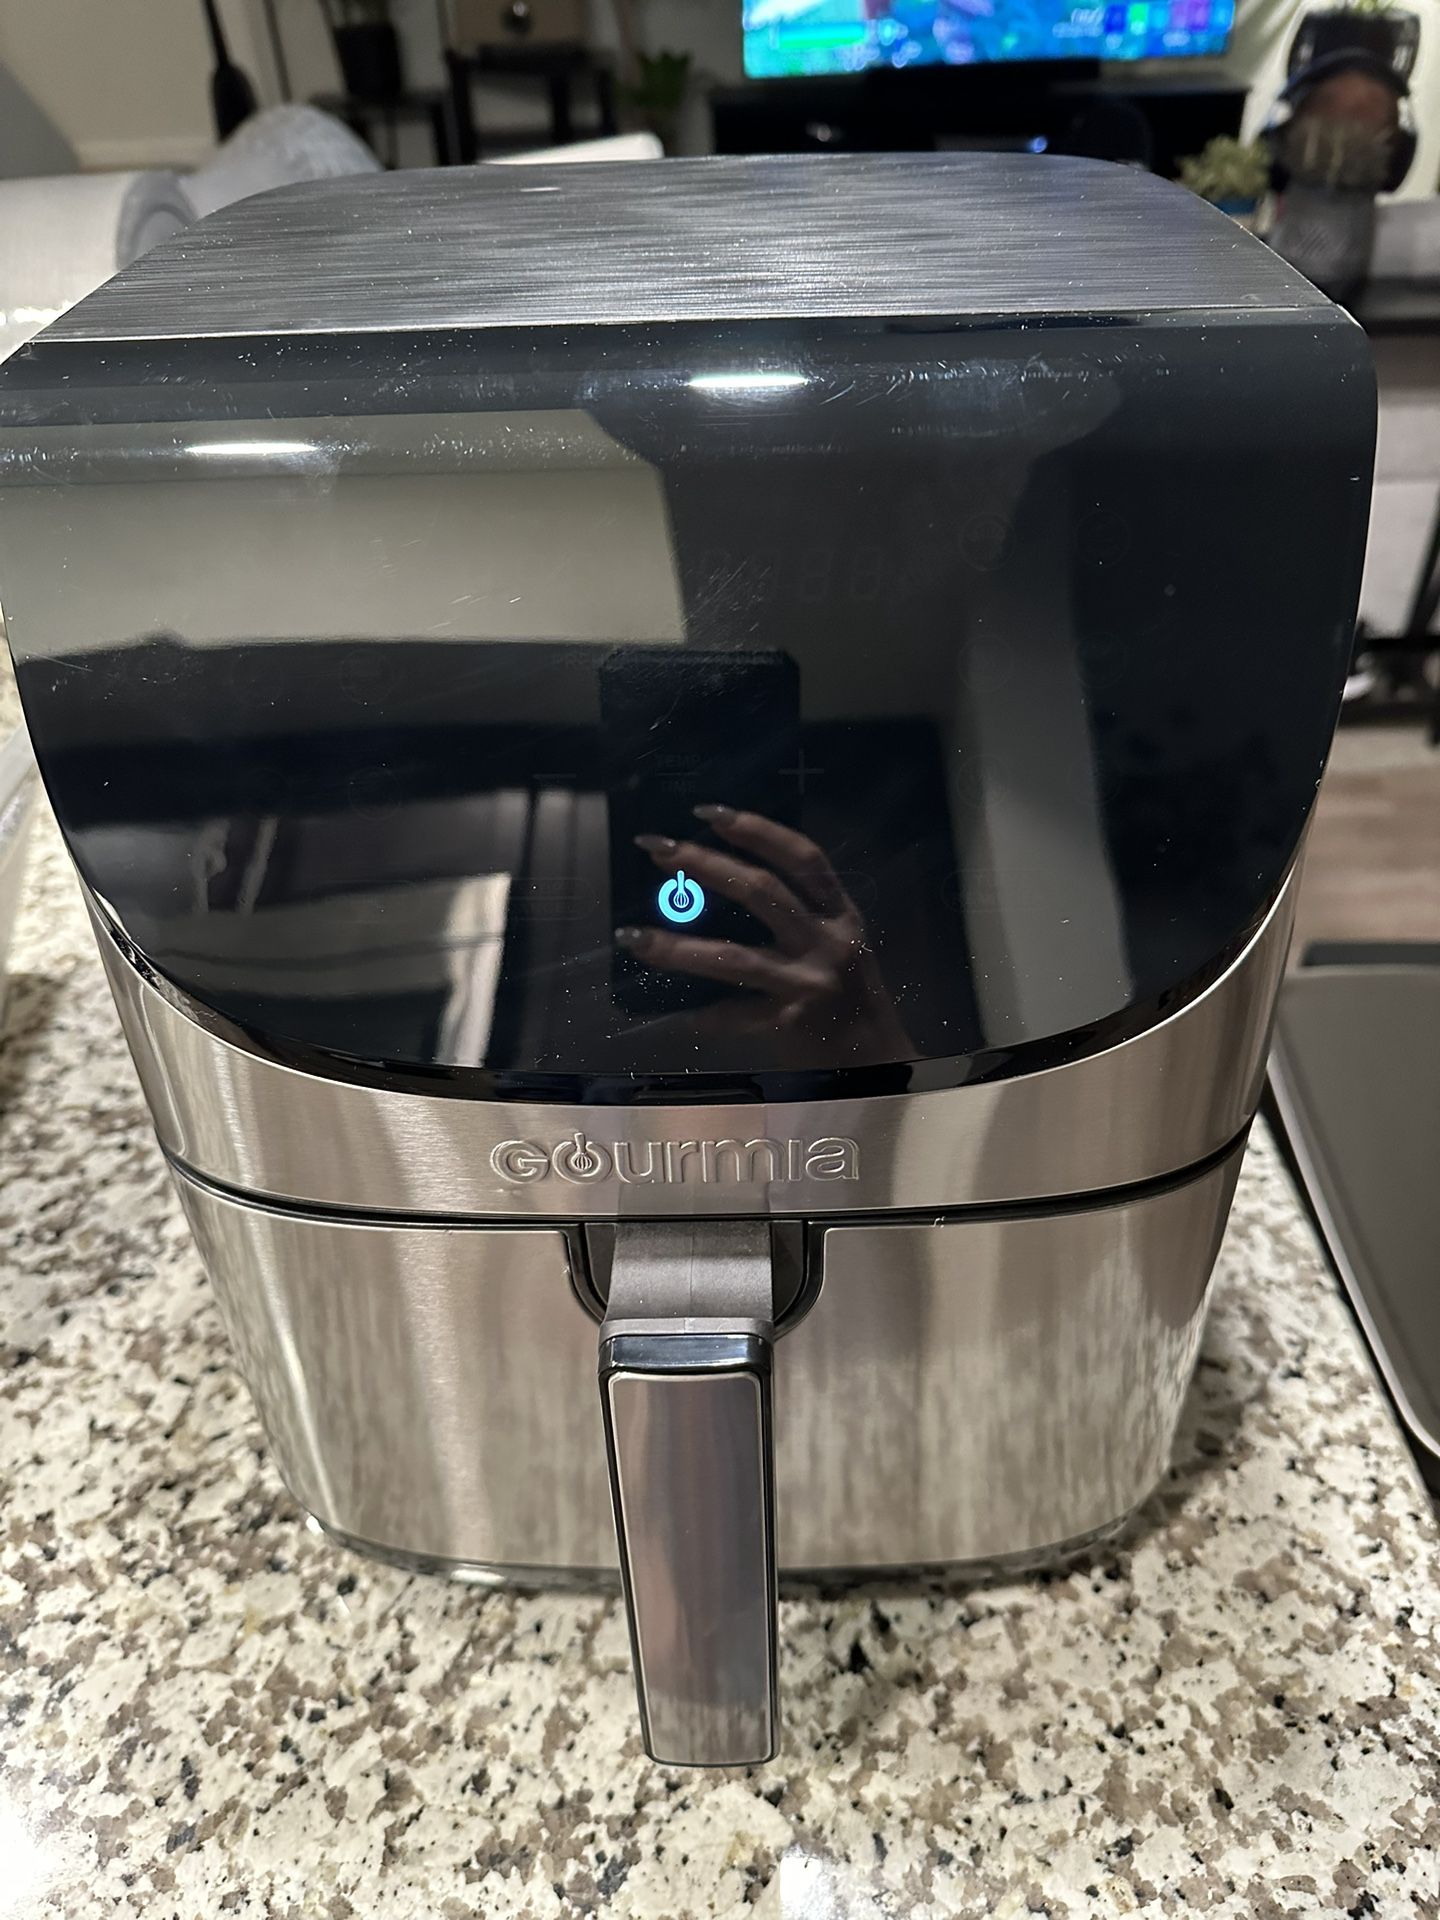 Cosori Air fryer for Sale in Los Angeles, CA - OfferUp